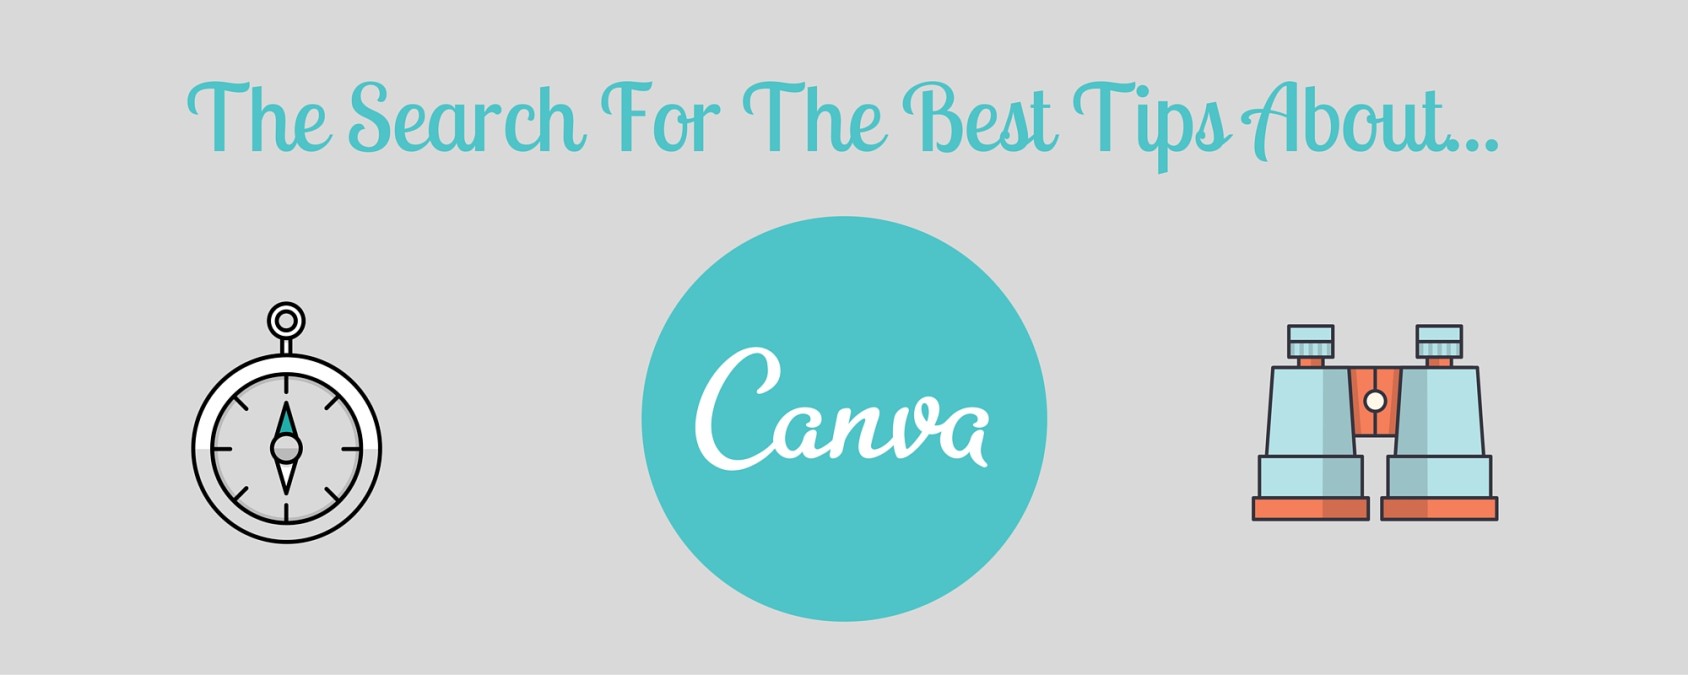 Top Tips for Canva